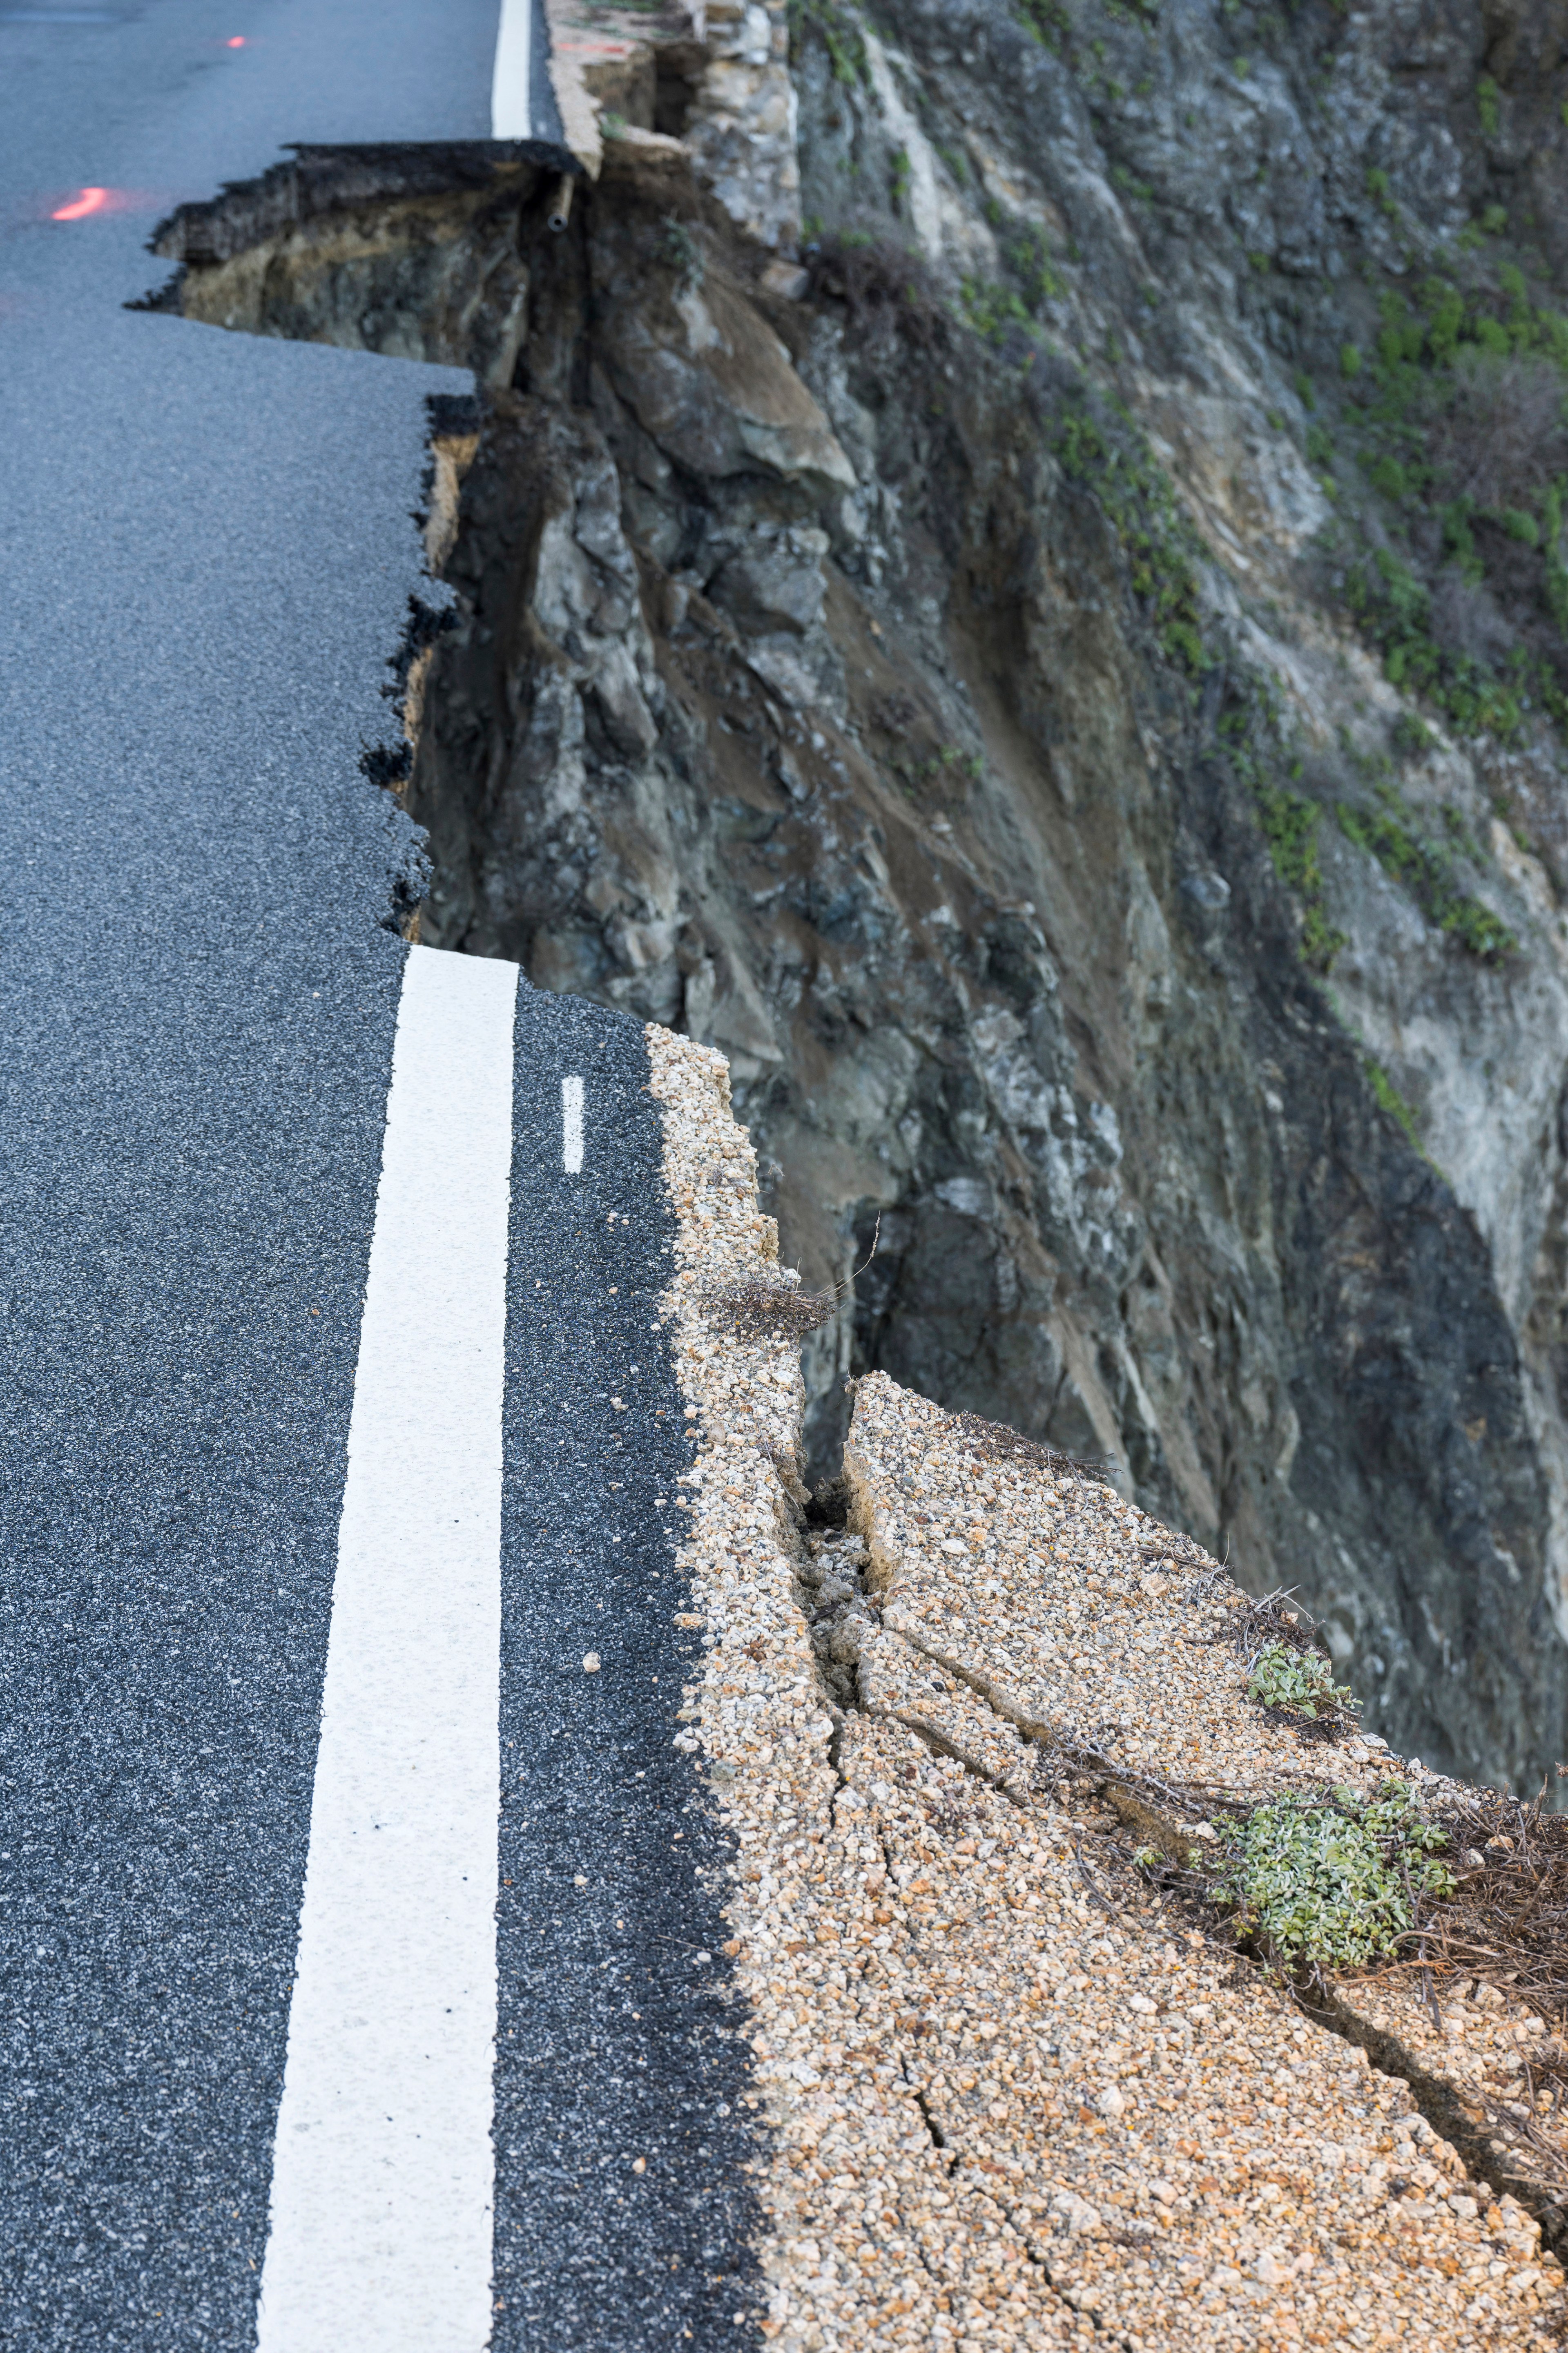 A road abruptly ends at a collapsed cliff edge, with barriers partially visible.